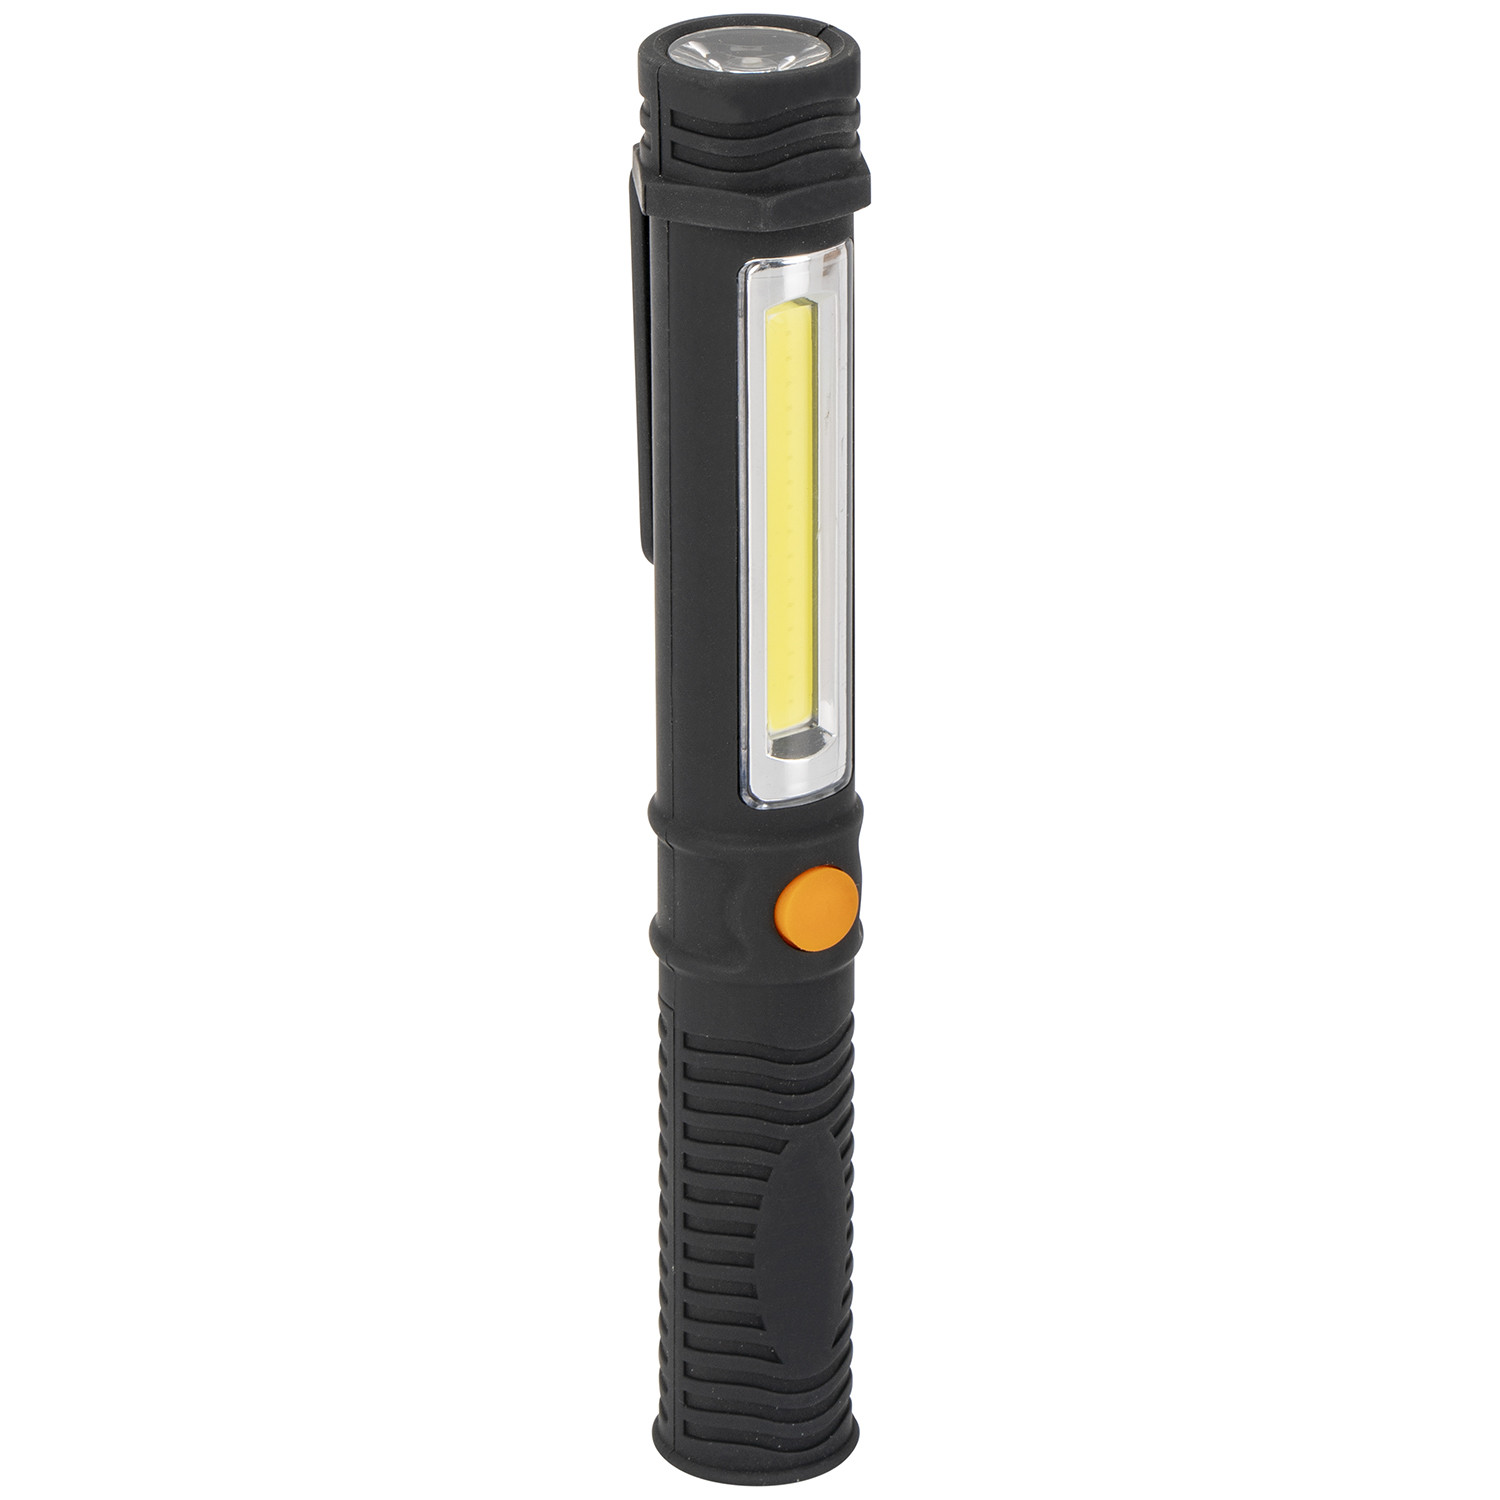 Saber COB Penlight and Torch 1W Image